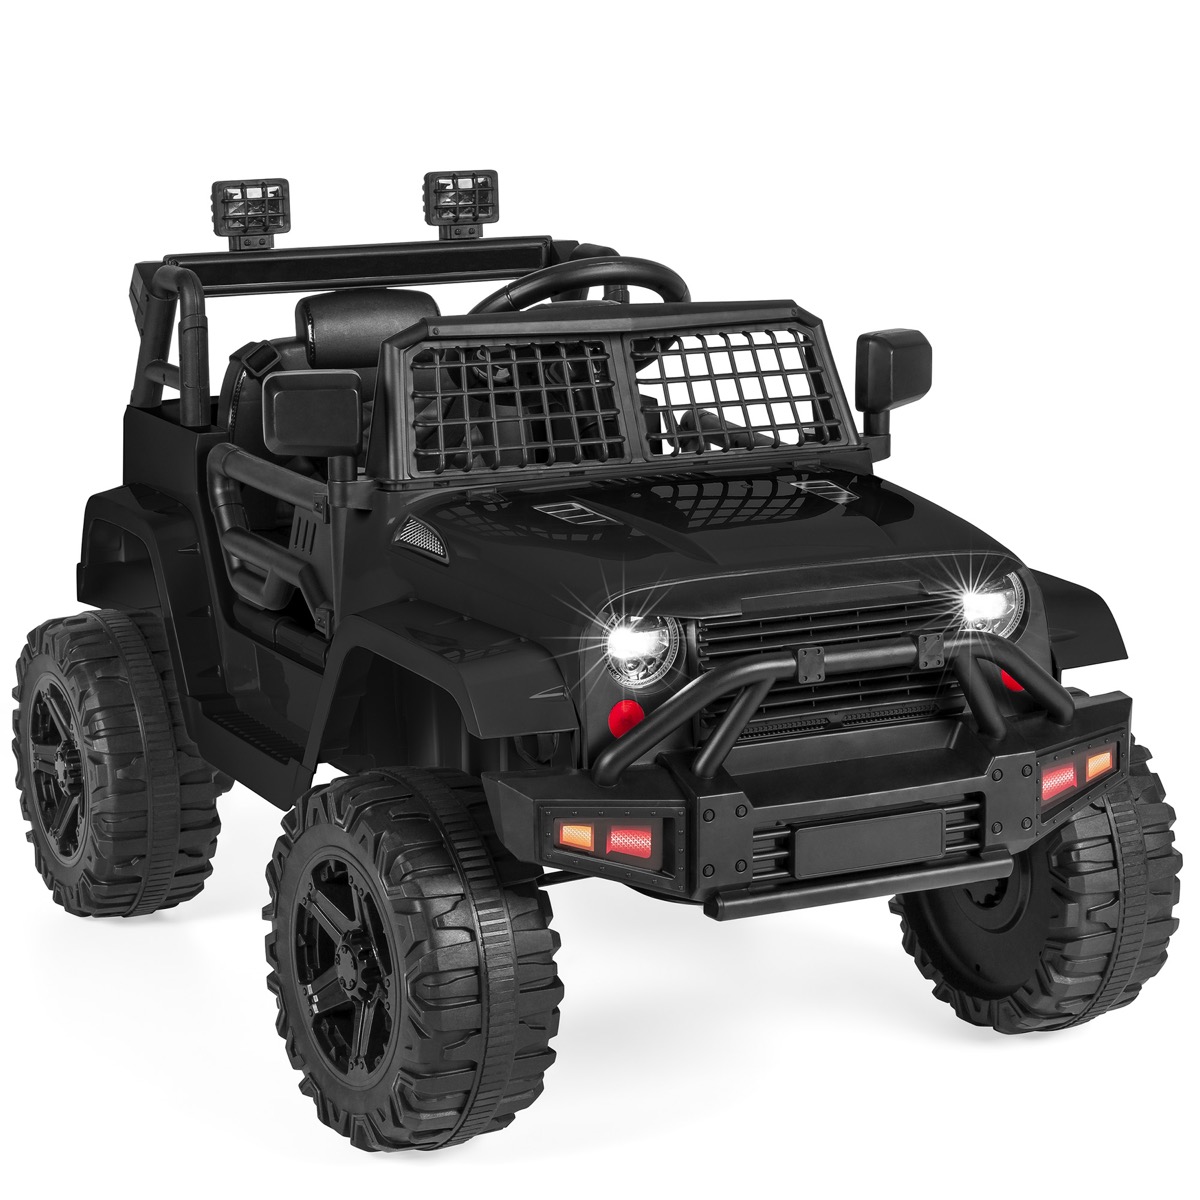 Black ride-on toy truck for kids